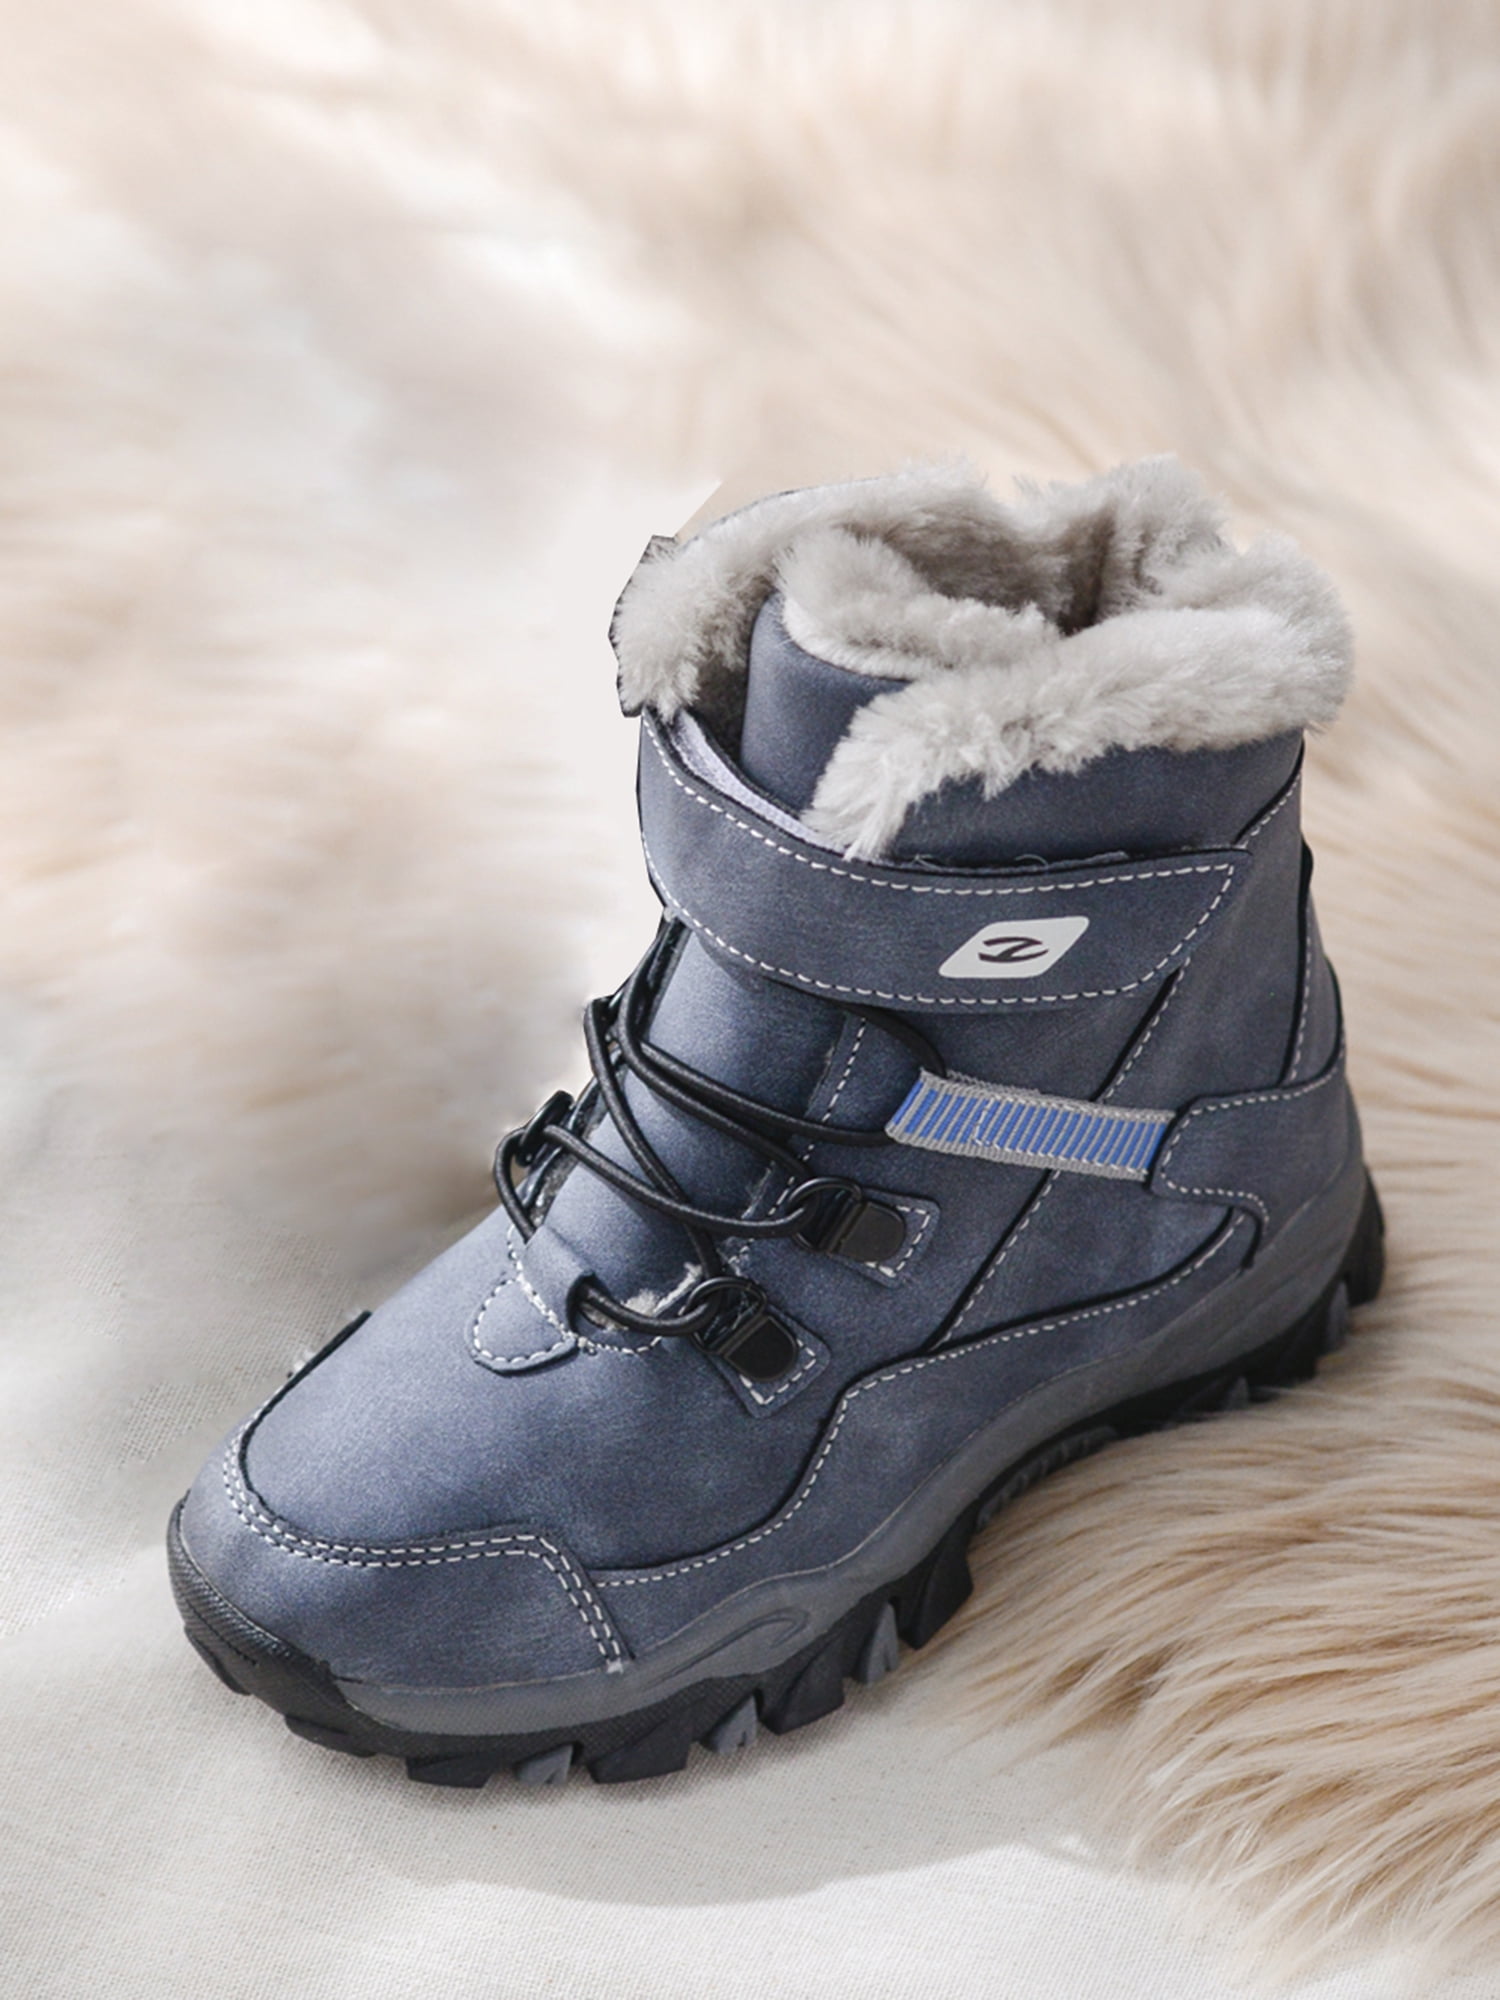 Boys Snow Boots for Boys Little Big Kids Size Cold Weather Waterproof Outdoor Warm Winte Faux Fur Lined Winter Flat Riding Boots Shoes Little Kid/Big Kid 